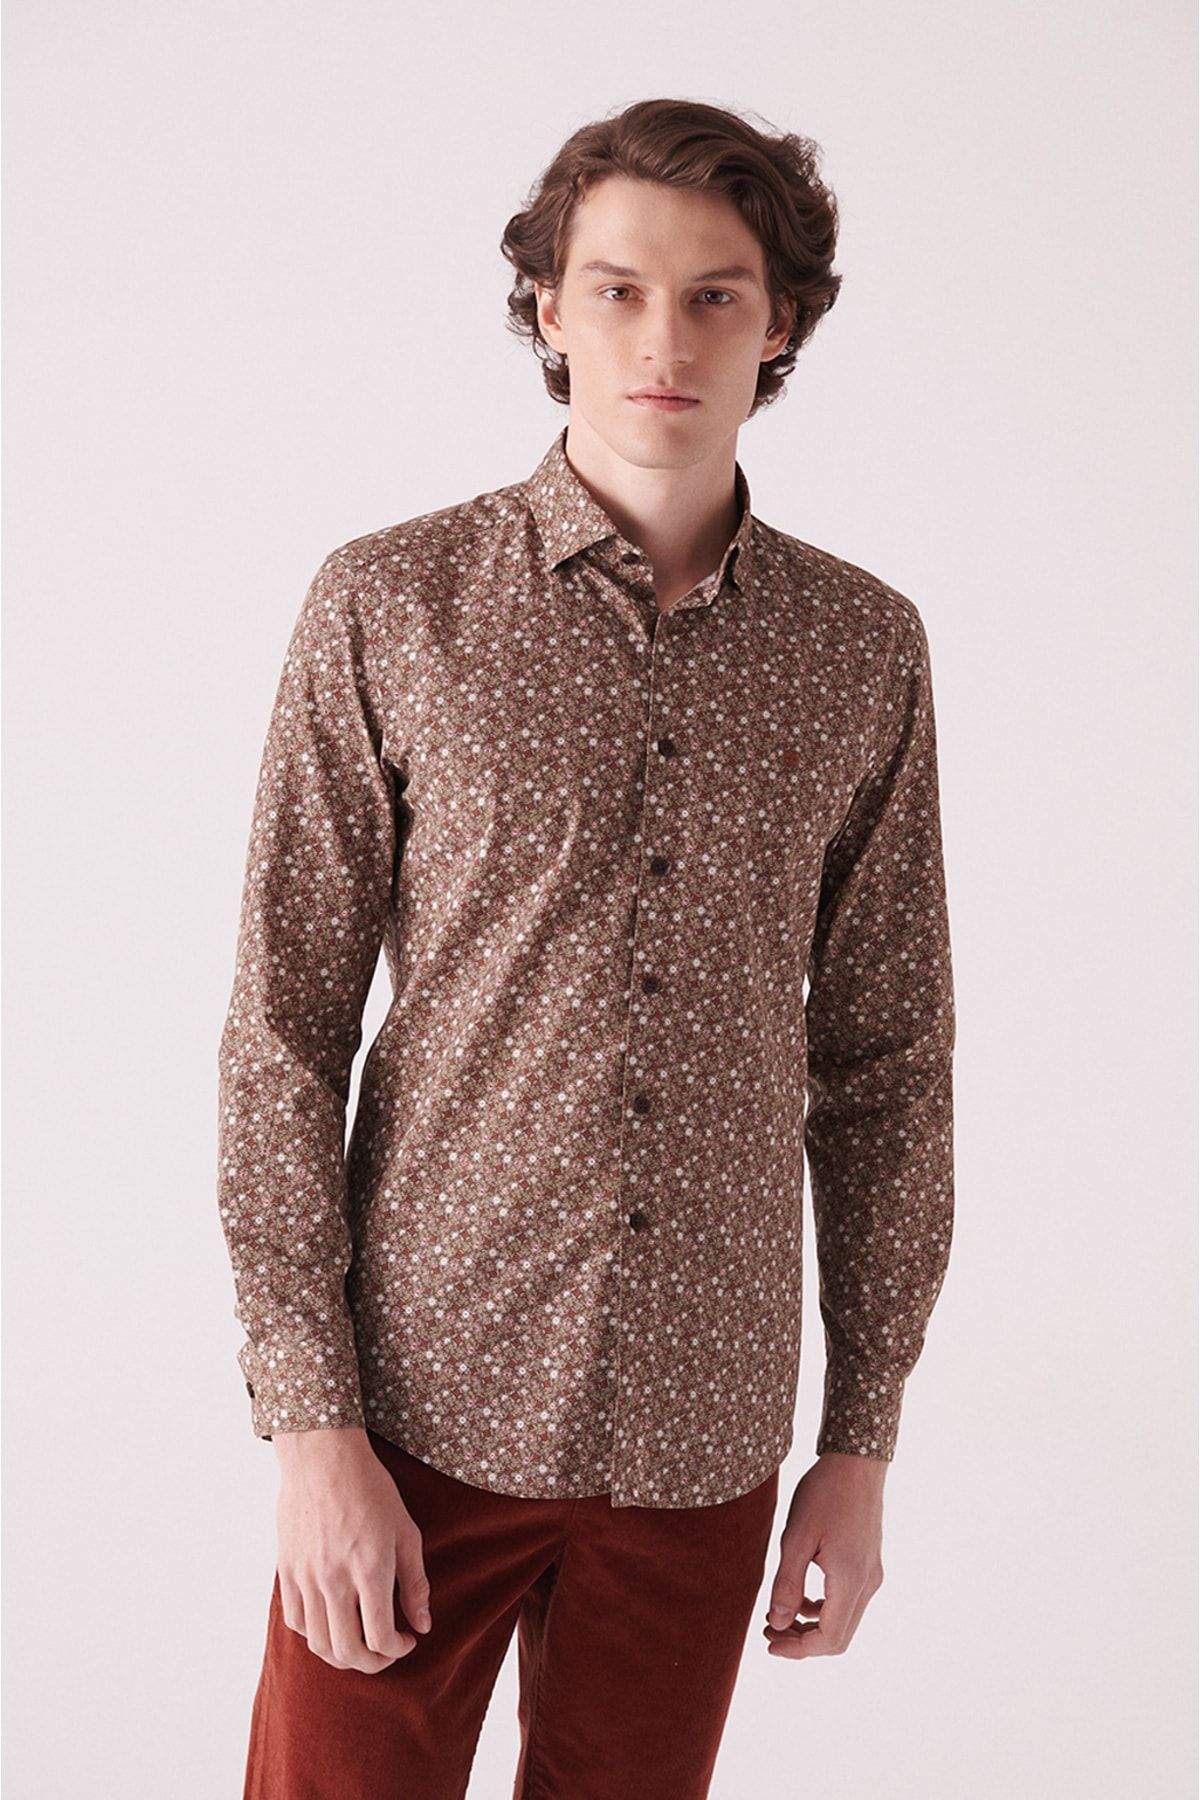 mens-brown-abstract-patterned-shirt-a22y2003